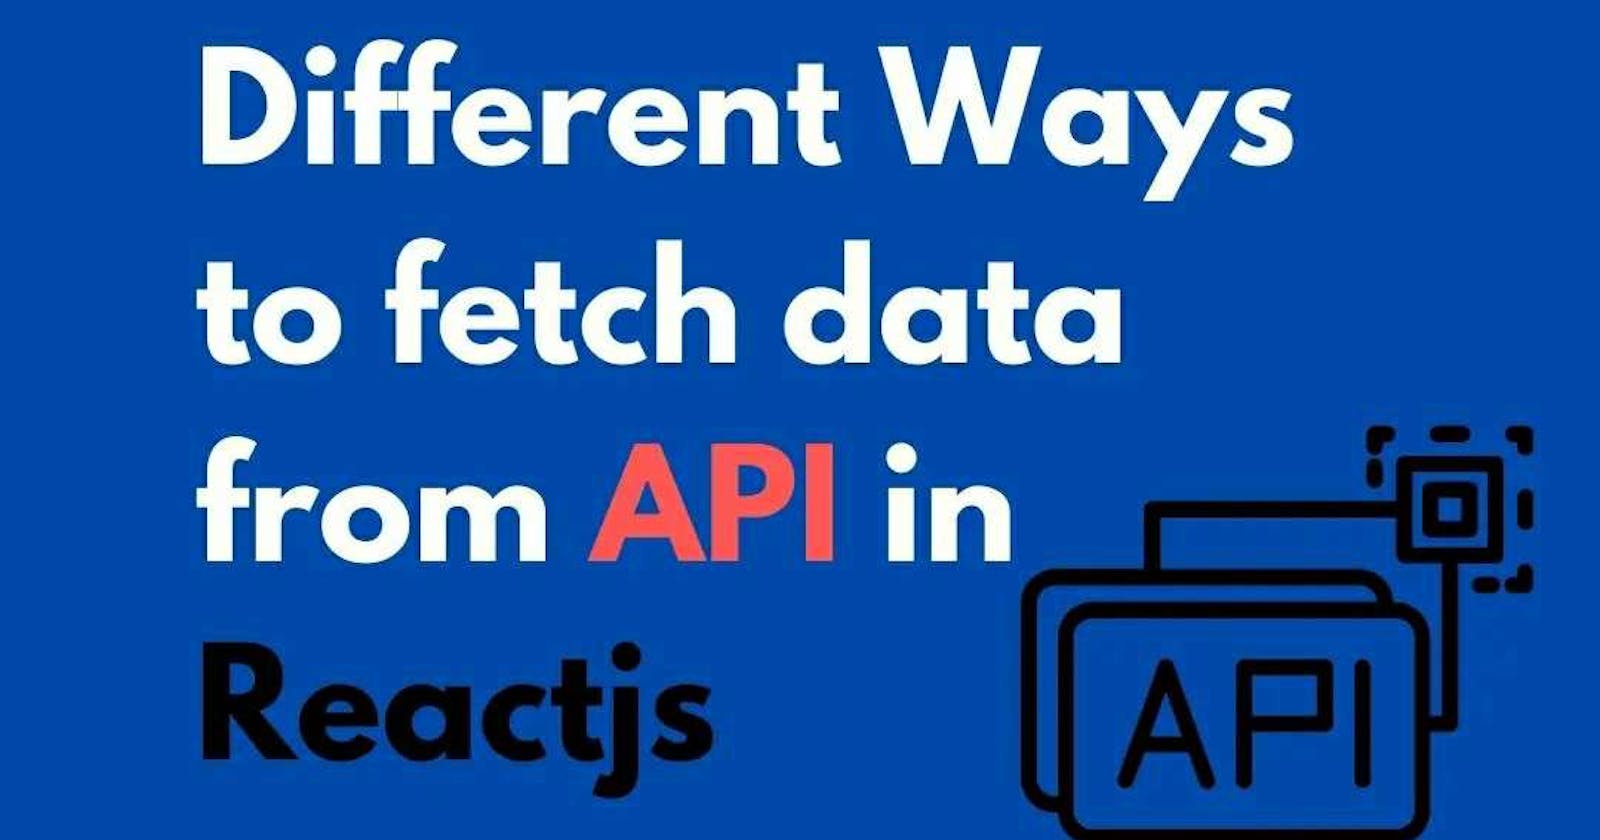 Different Ways to fetch data from API in Reactjs